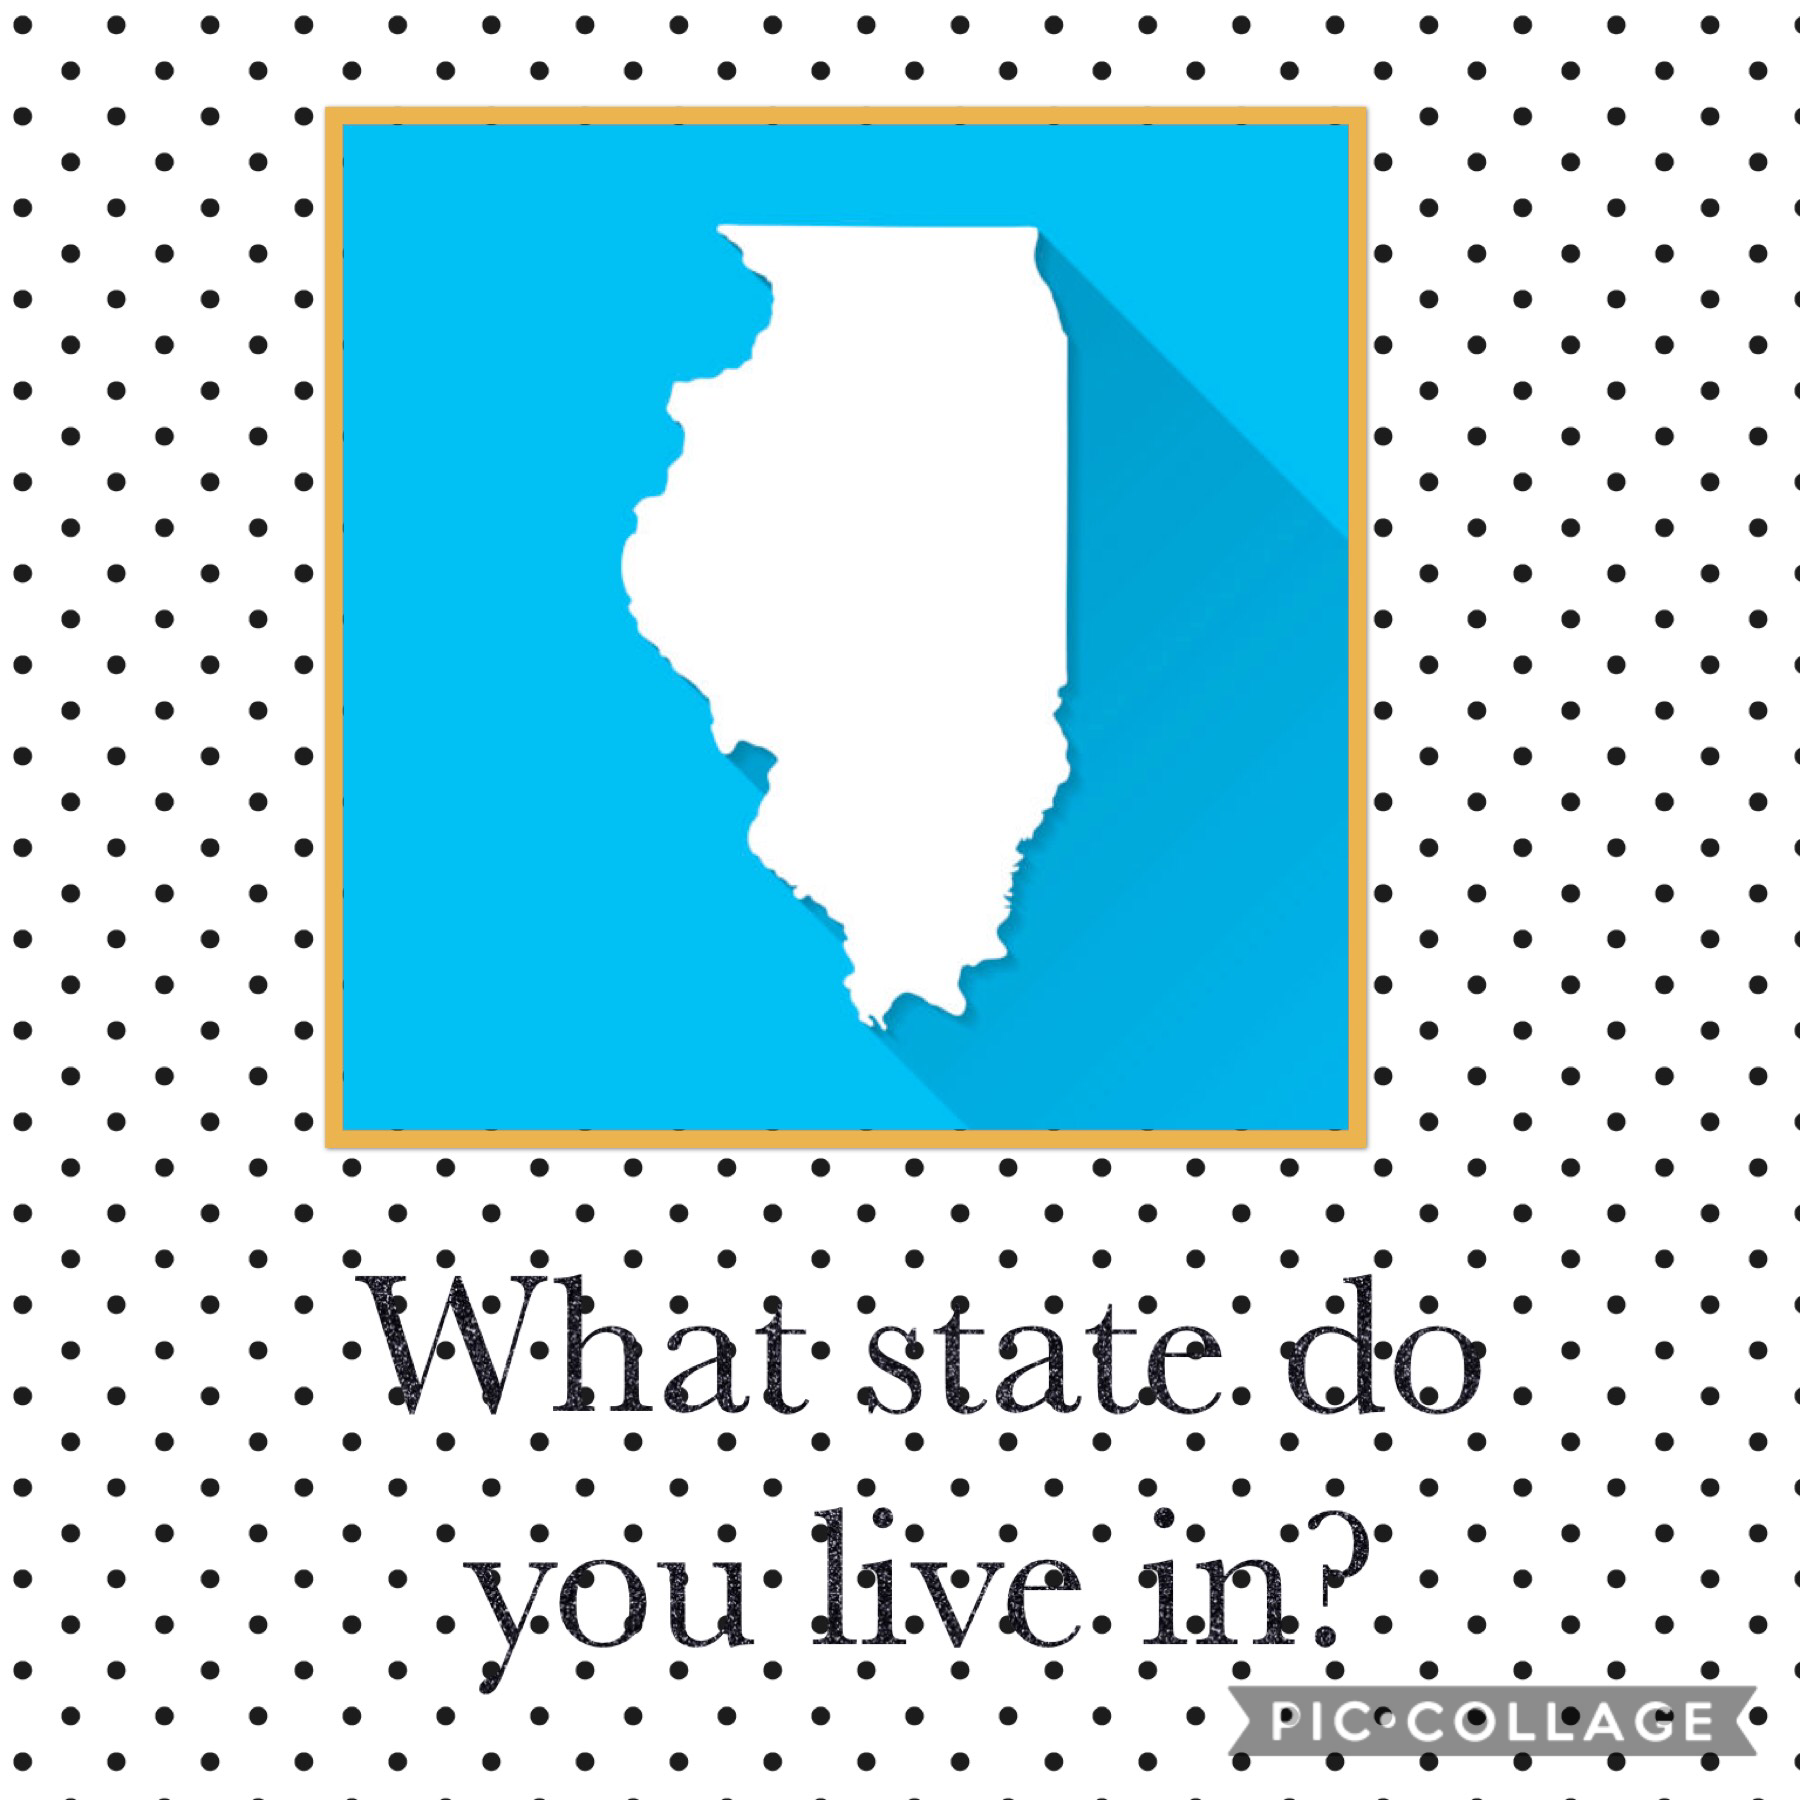 What state do you live in? I live in Illinois.